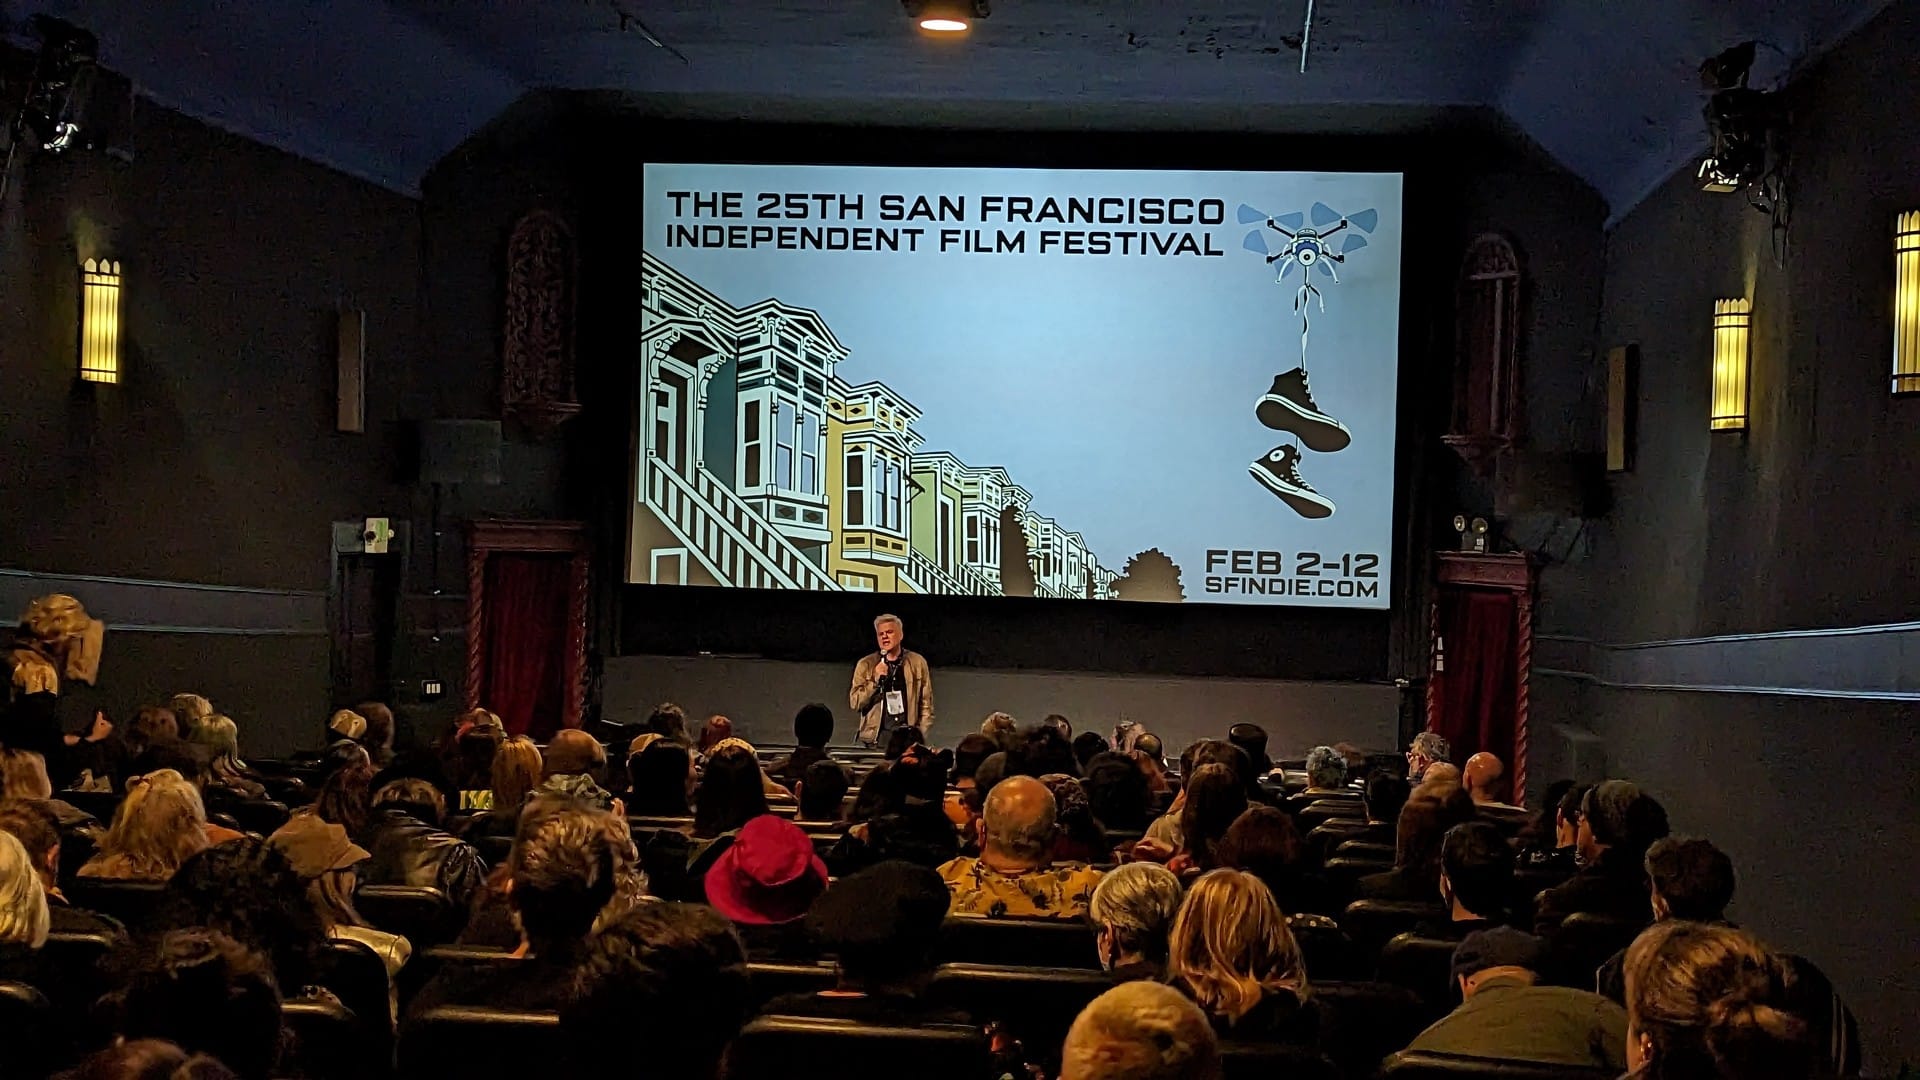 A man with a microphone speaks to an audience in front of a screen reading "25th San Francisco Independent Film Festival" 